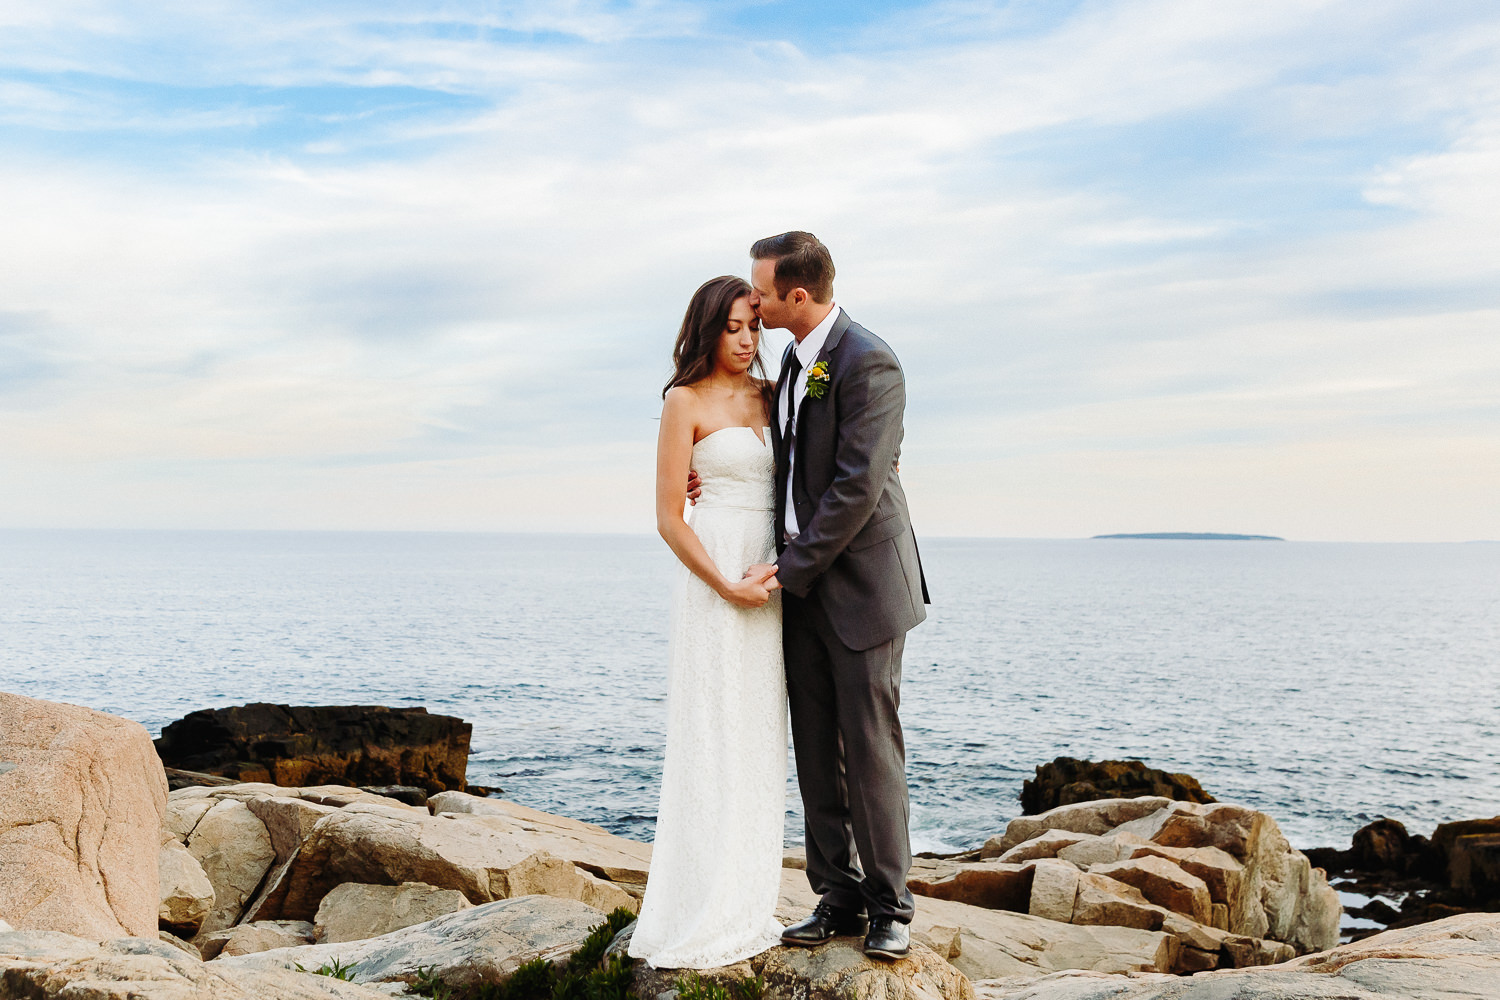 Groom kisses bride's forehead during Otter Point elopement in Acadia National Park